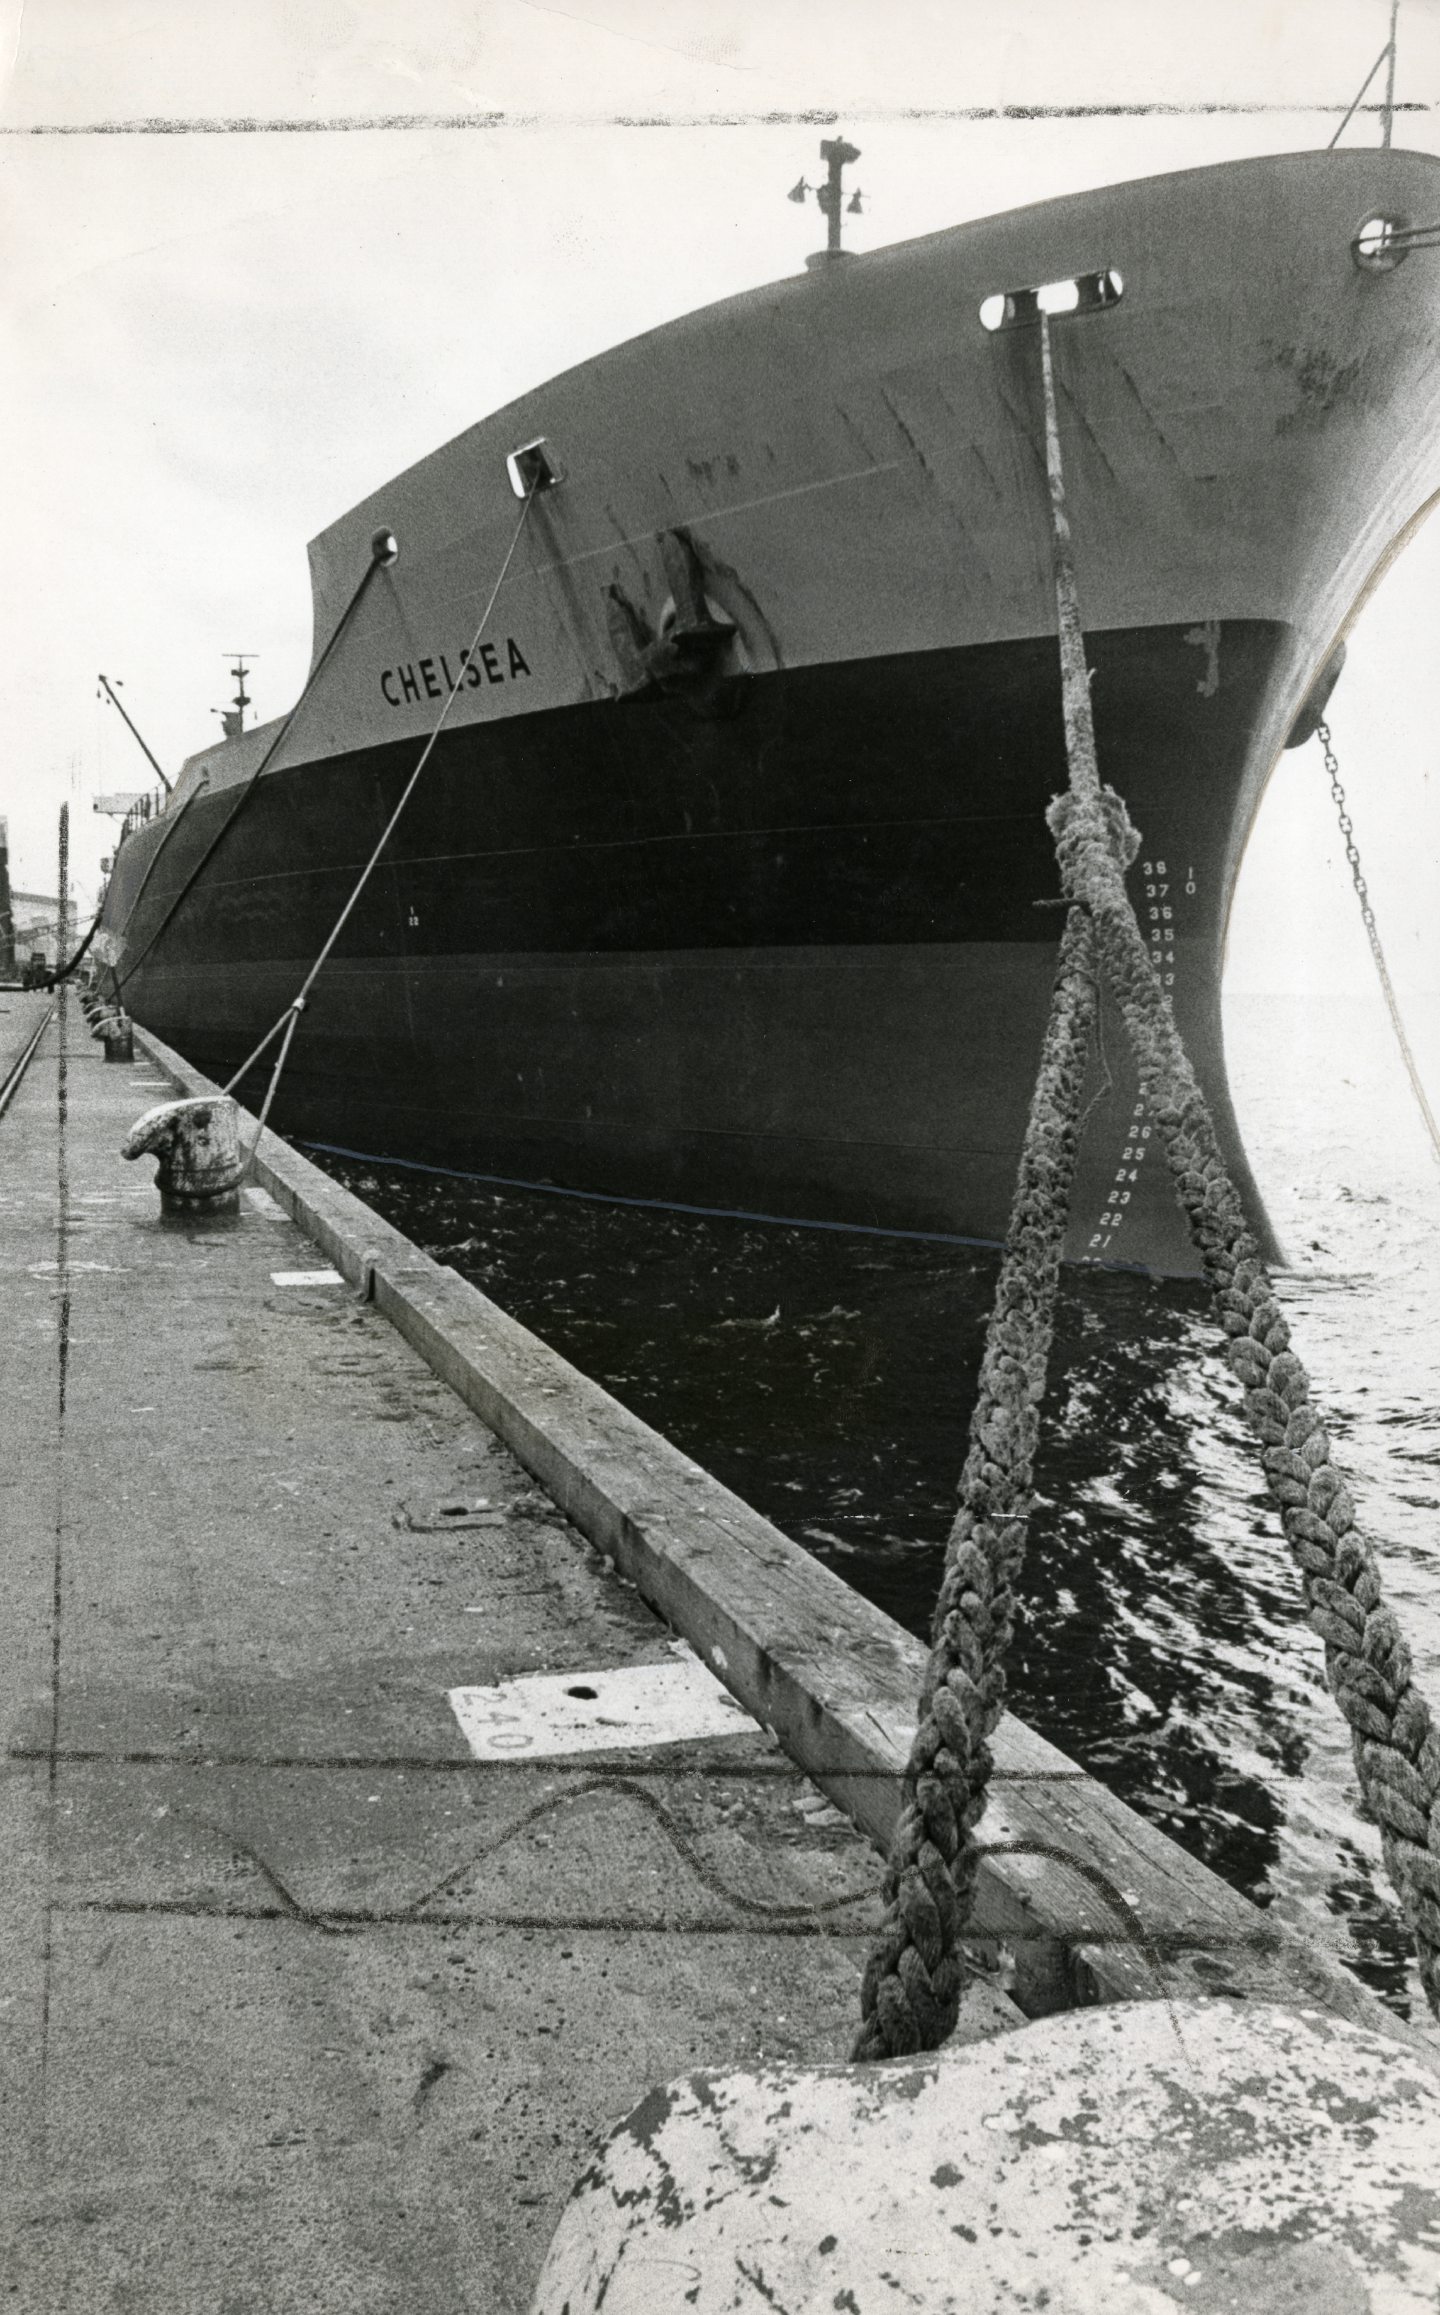 The Chelsea oil tanker berthed at the harbour following the drama in 1983.